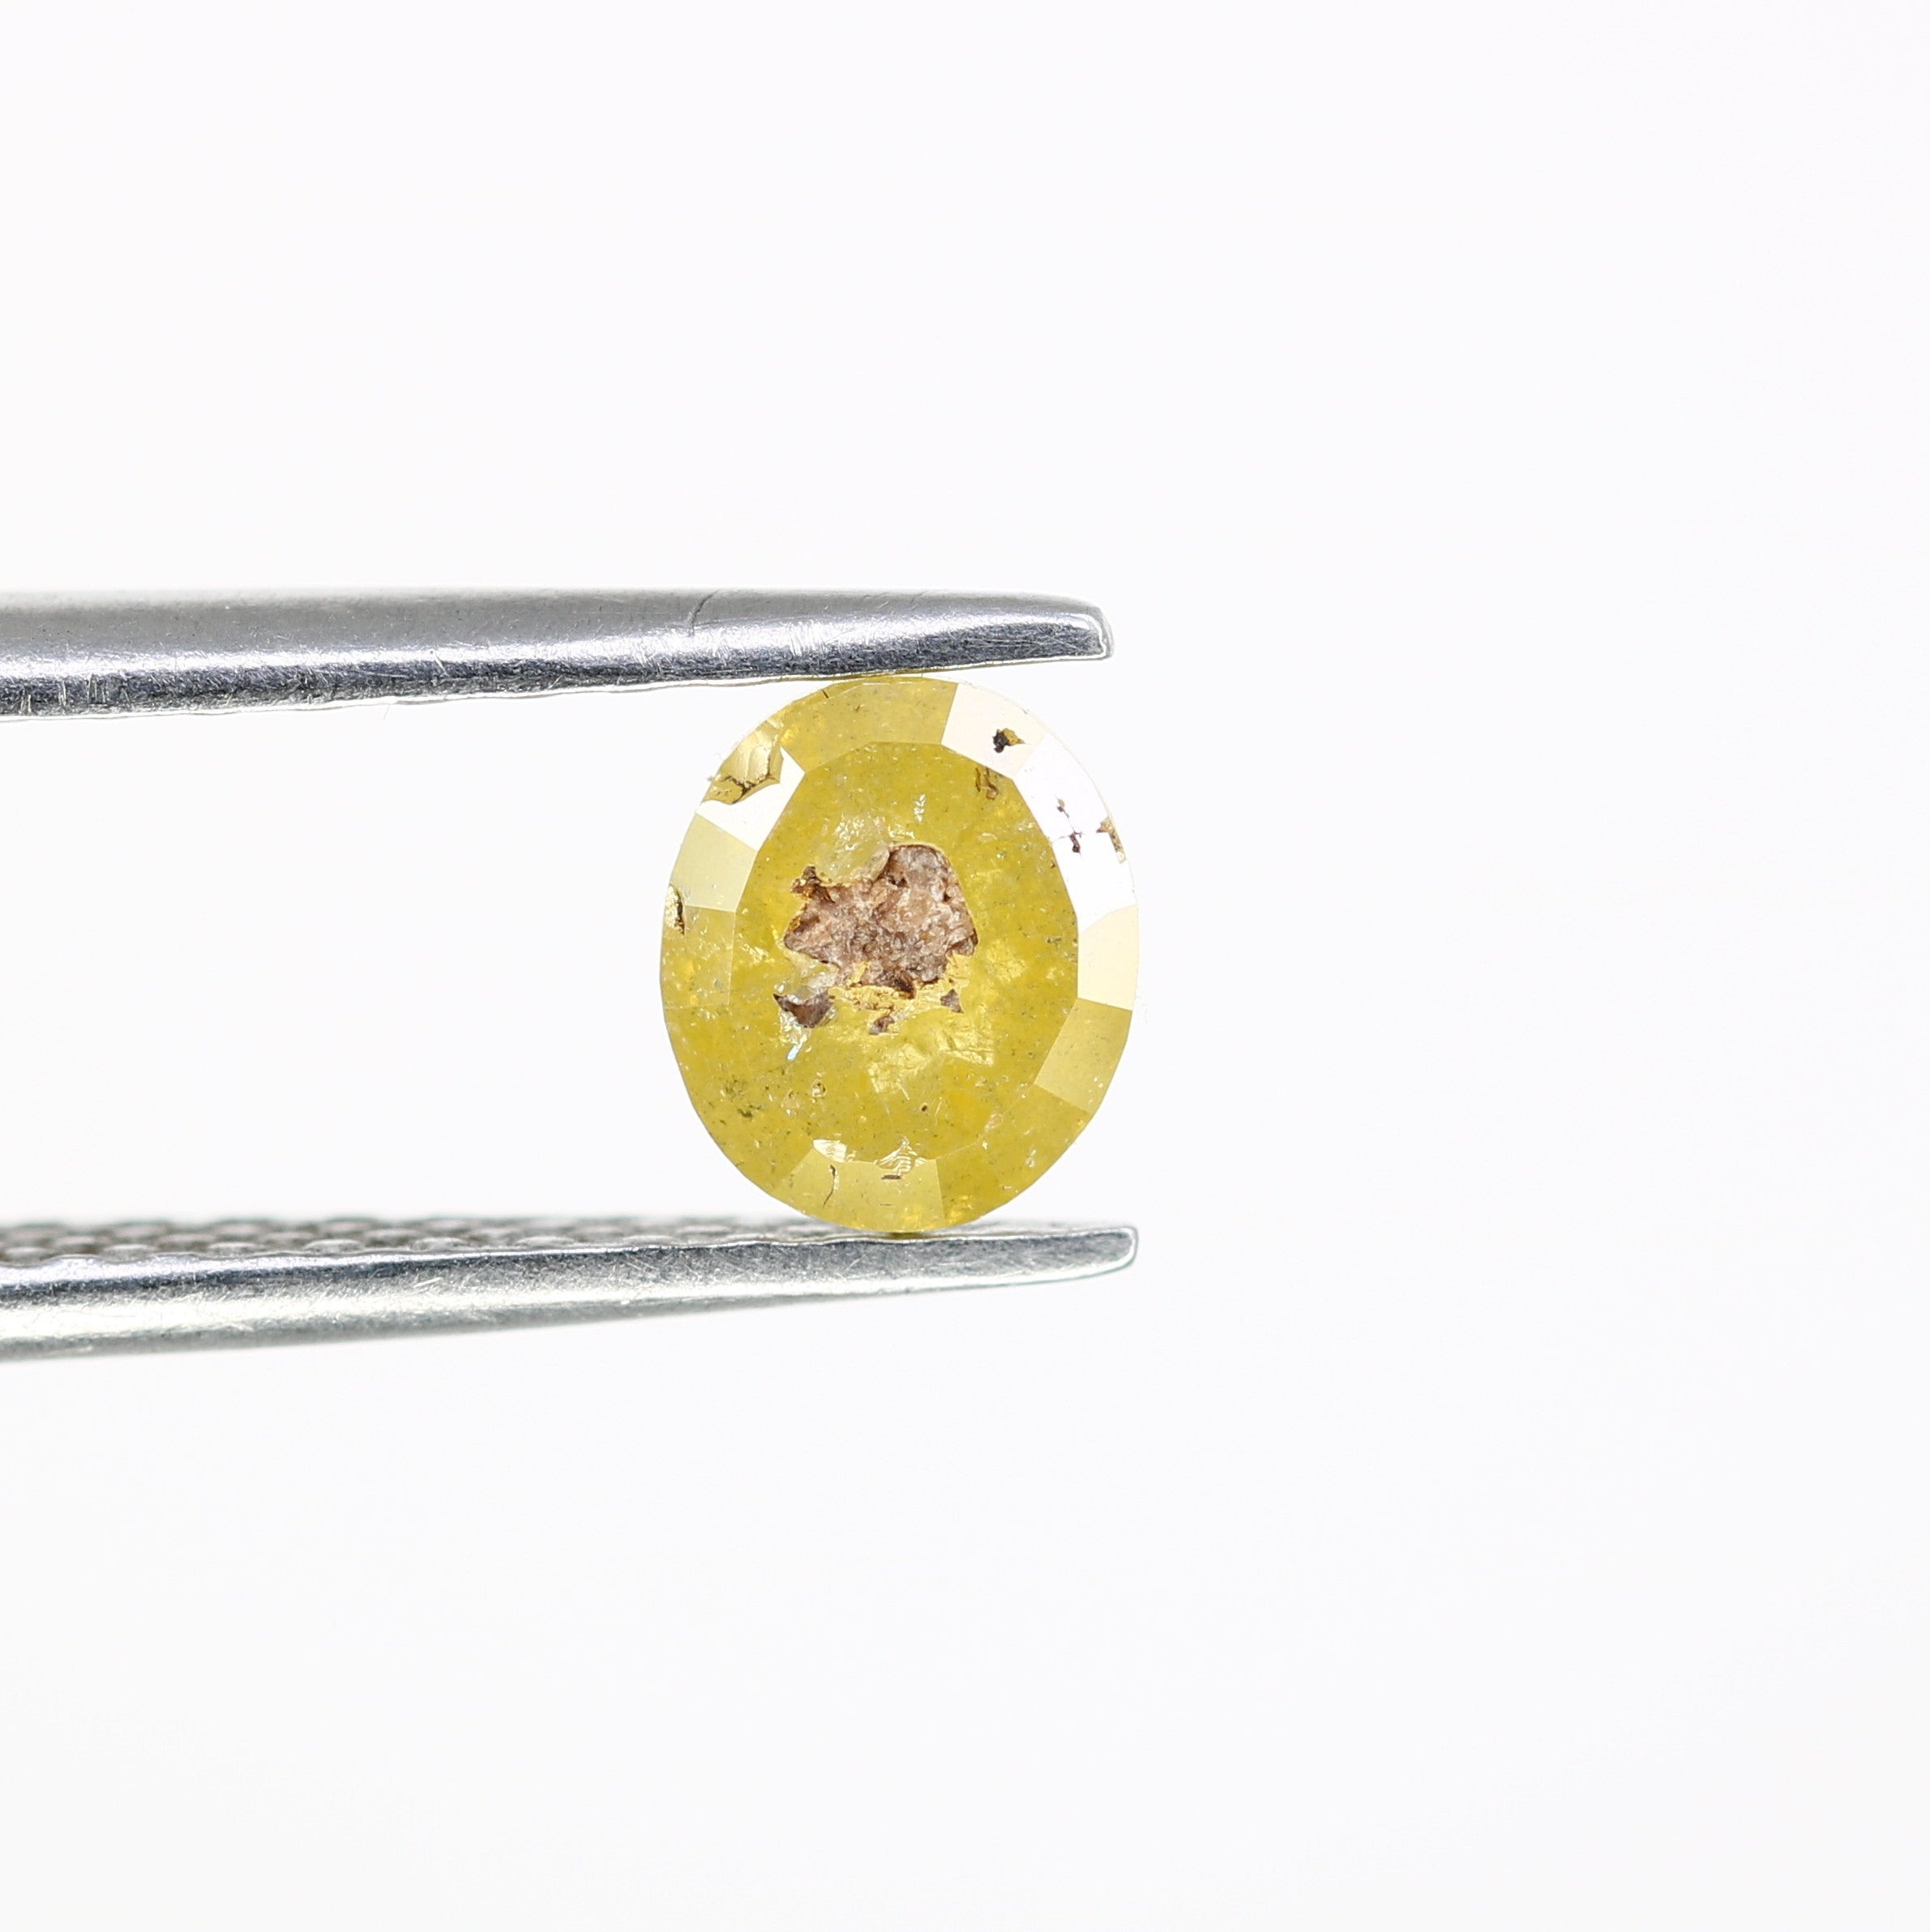 0.74 CT 5.8 x 5.0 MM Natural Yellow Rustic Ova Cut Diamond For Engagement Ring